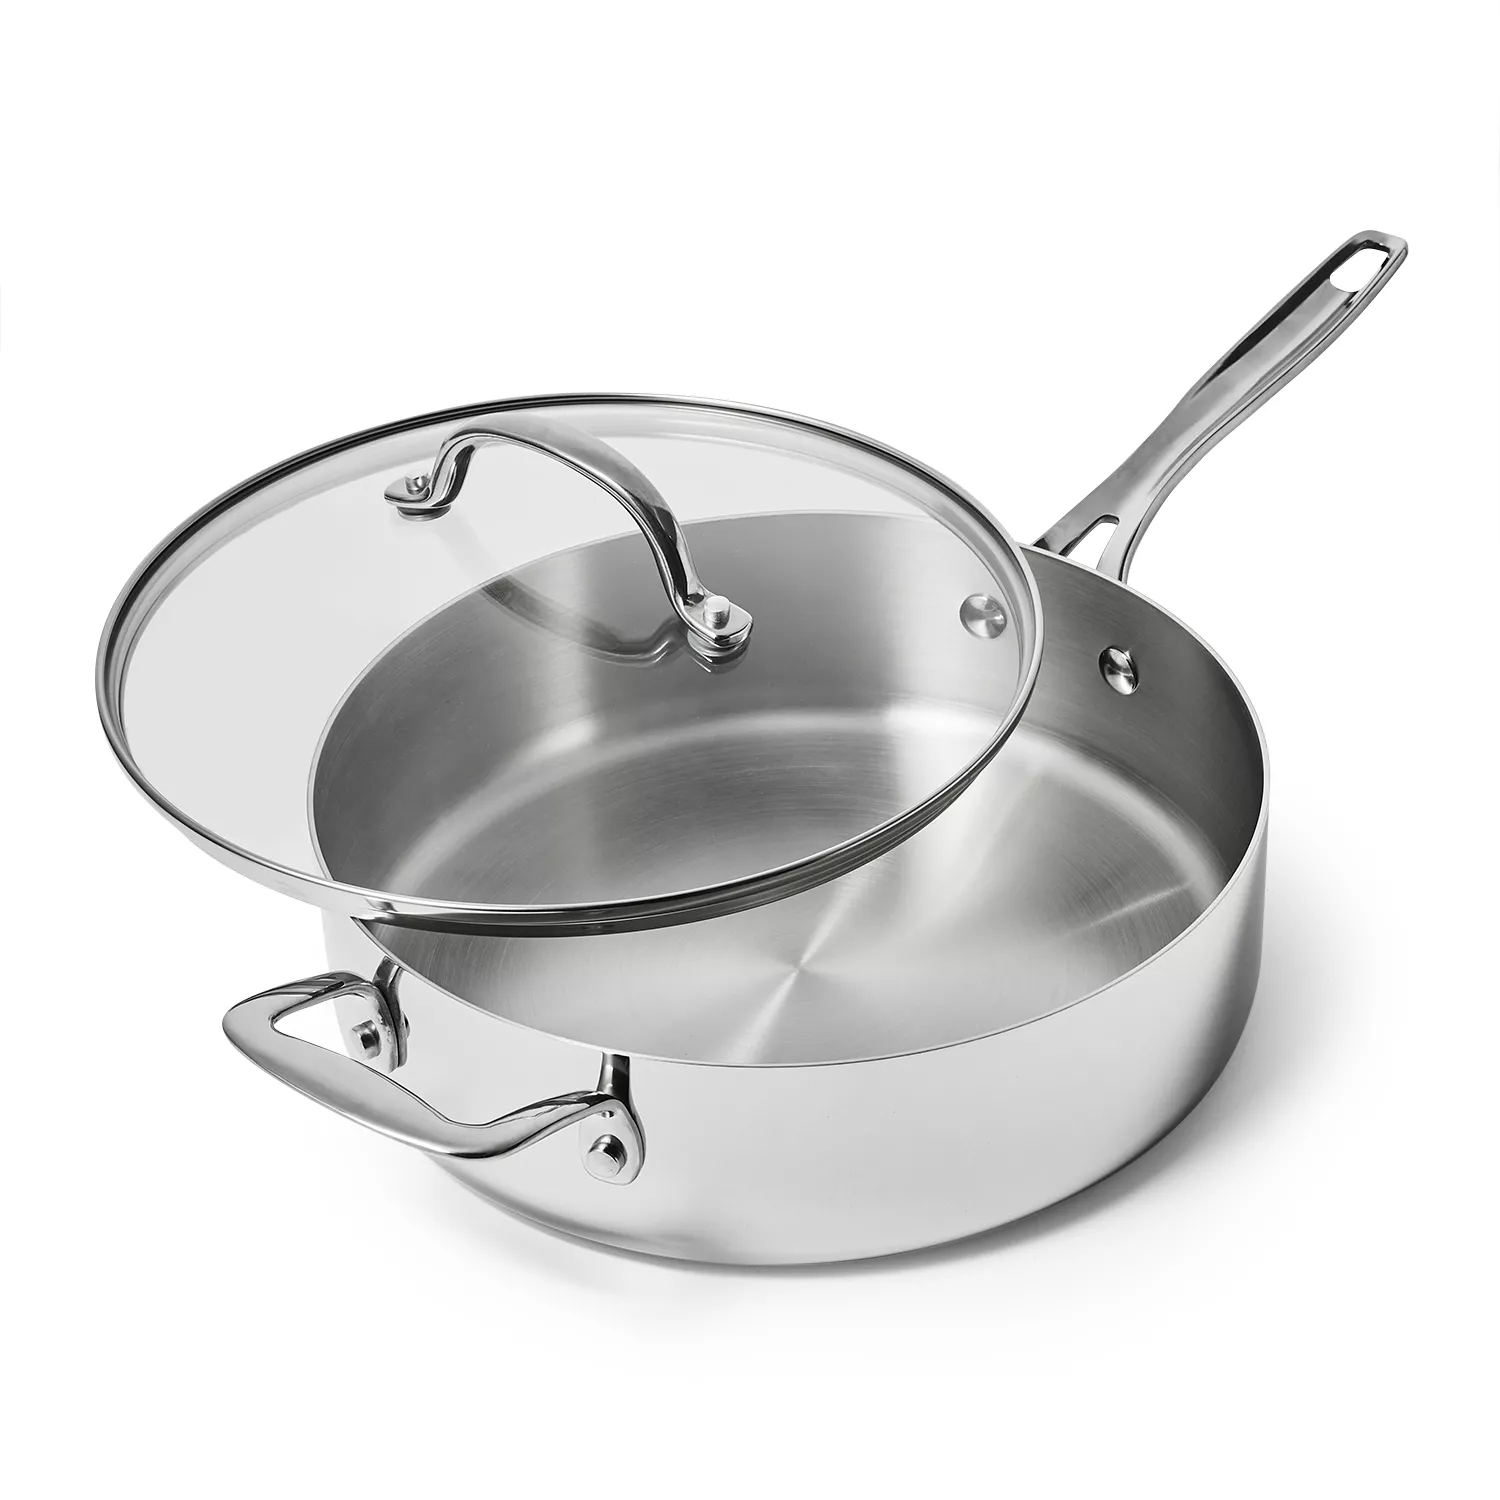 Le Creuset 4 qt. Stainless Steel Saucepan with Lid